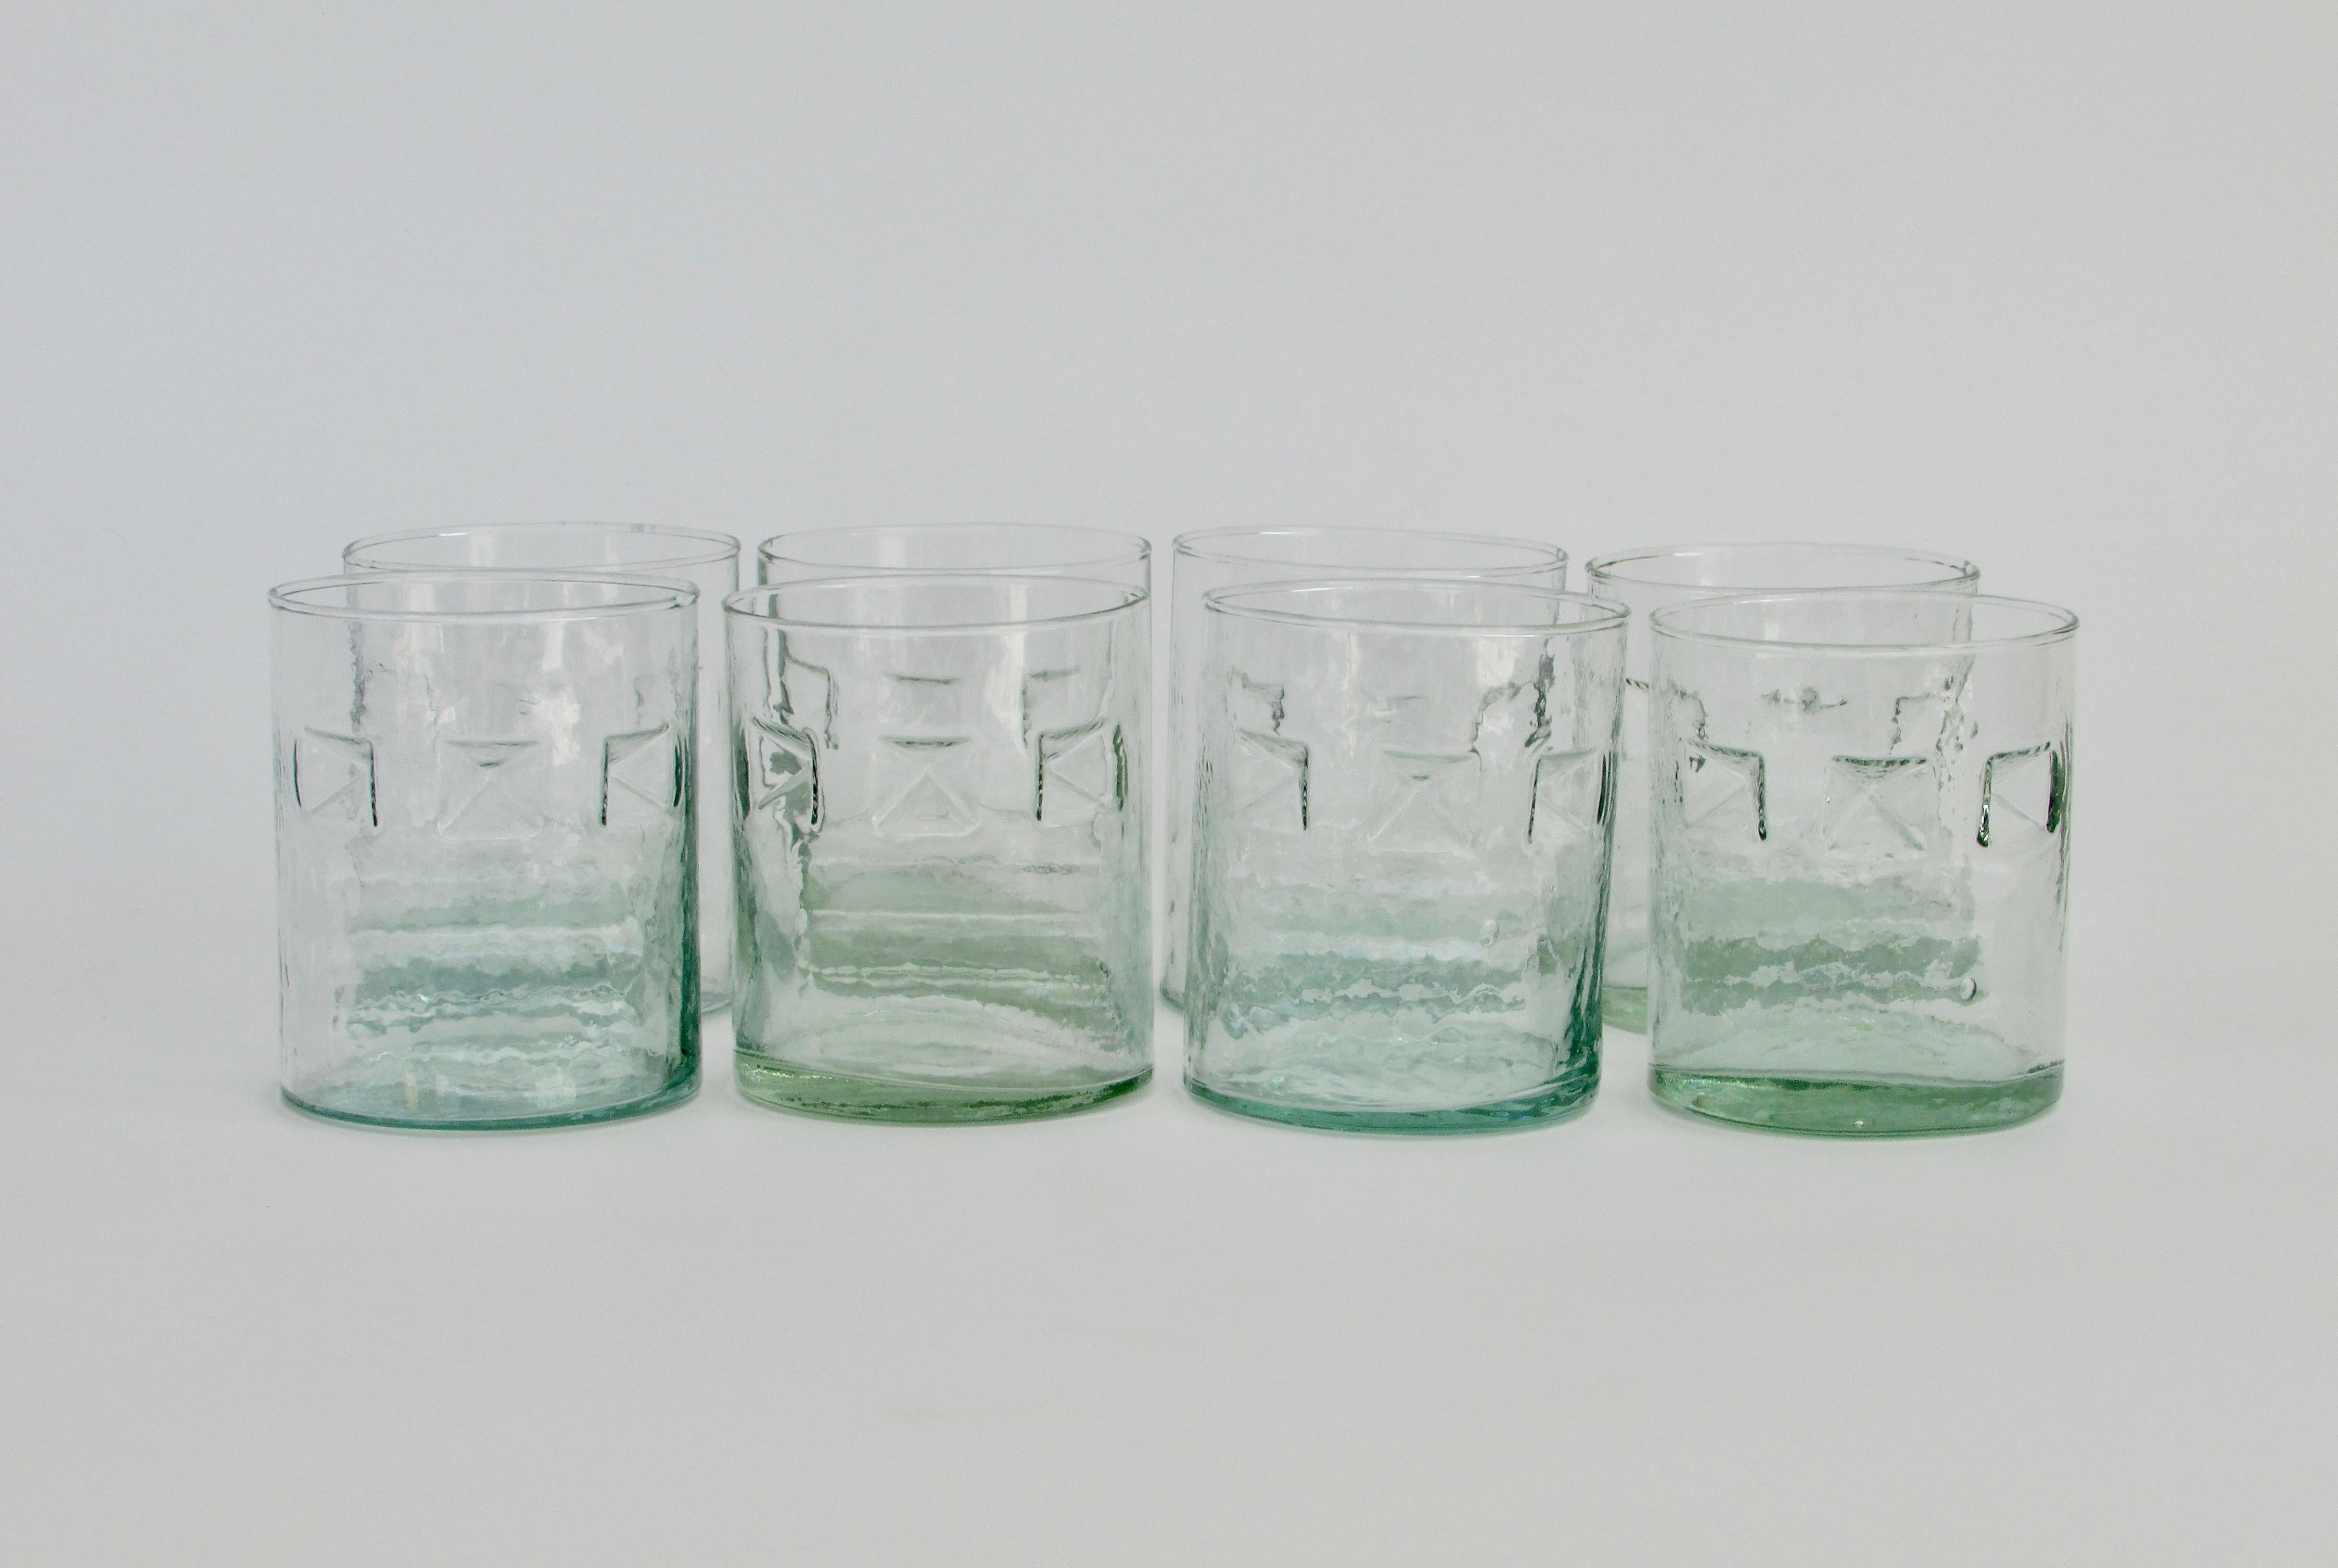 A green hue and a recycled wave texture throughout, these three finger lowball cocktail glasses have the post-modern design style you are looking for. Each one is unique and fits well in your hand. Great for a beach house.